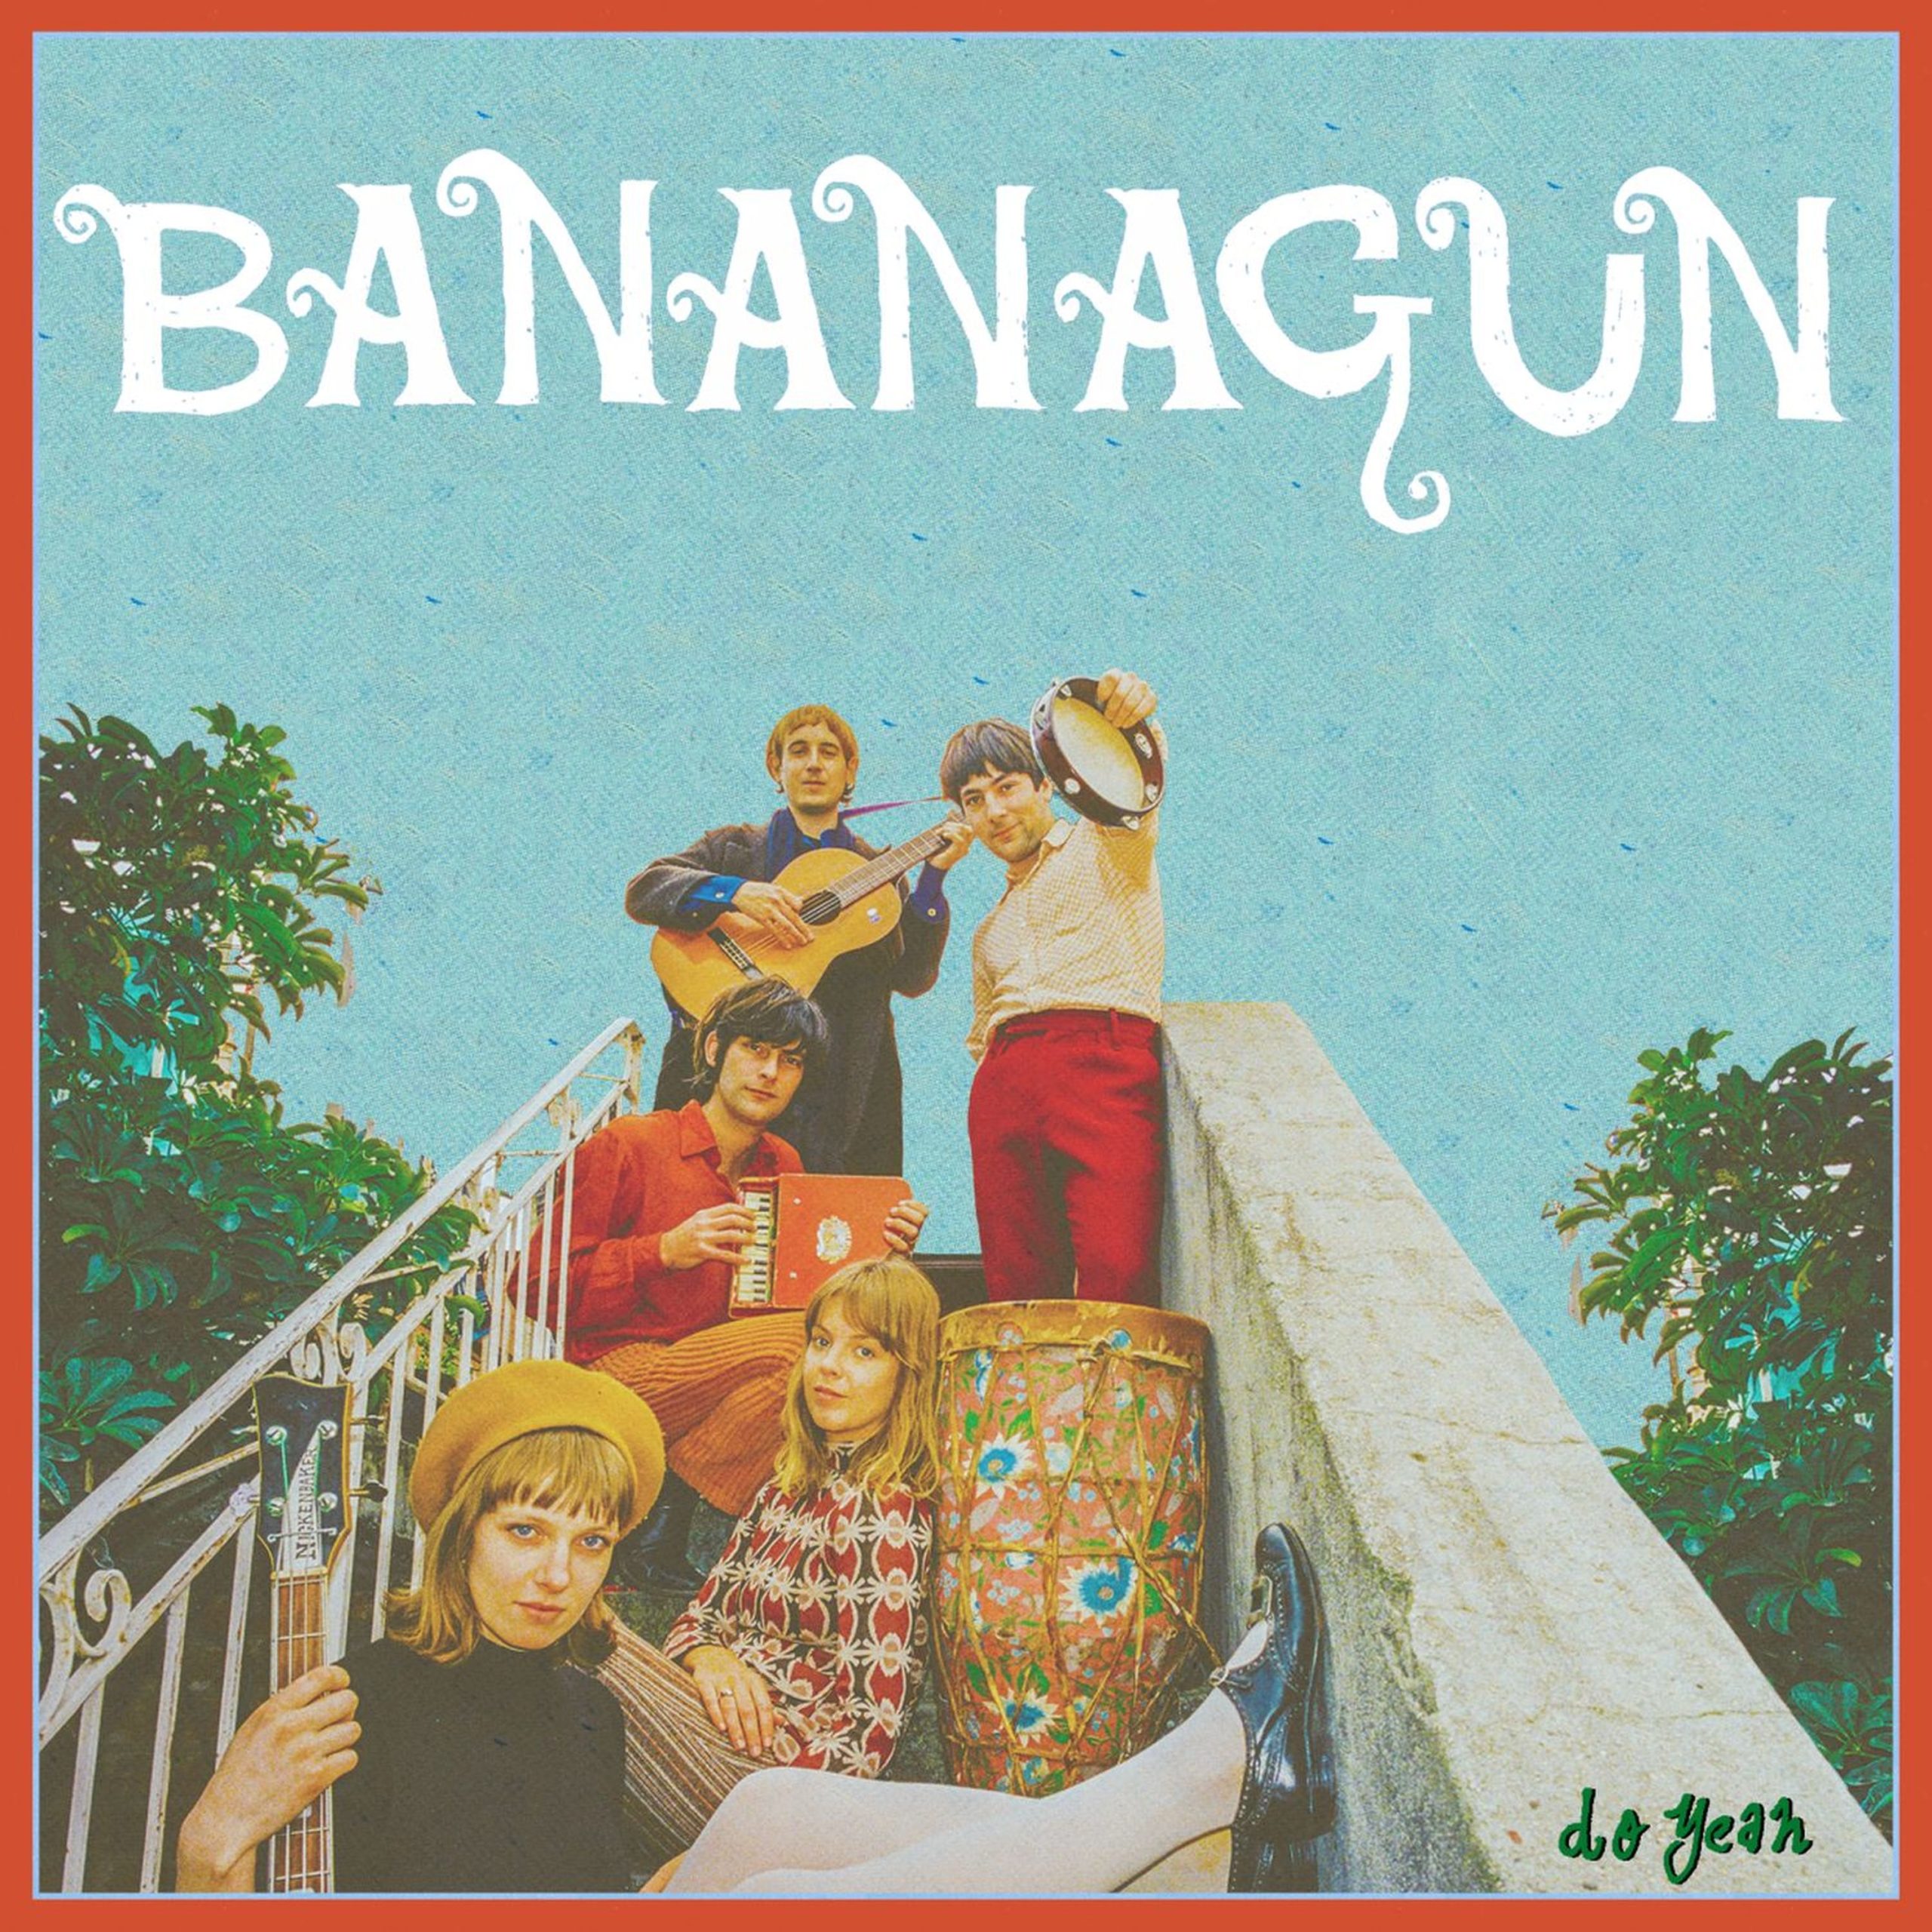 Bananagun announces limited edition 7″ ‘Do Yeah’ out on September 6th via Full Time Hobby; listen to two tracks ahead of the release